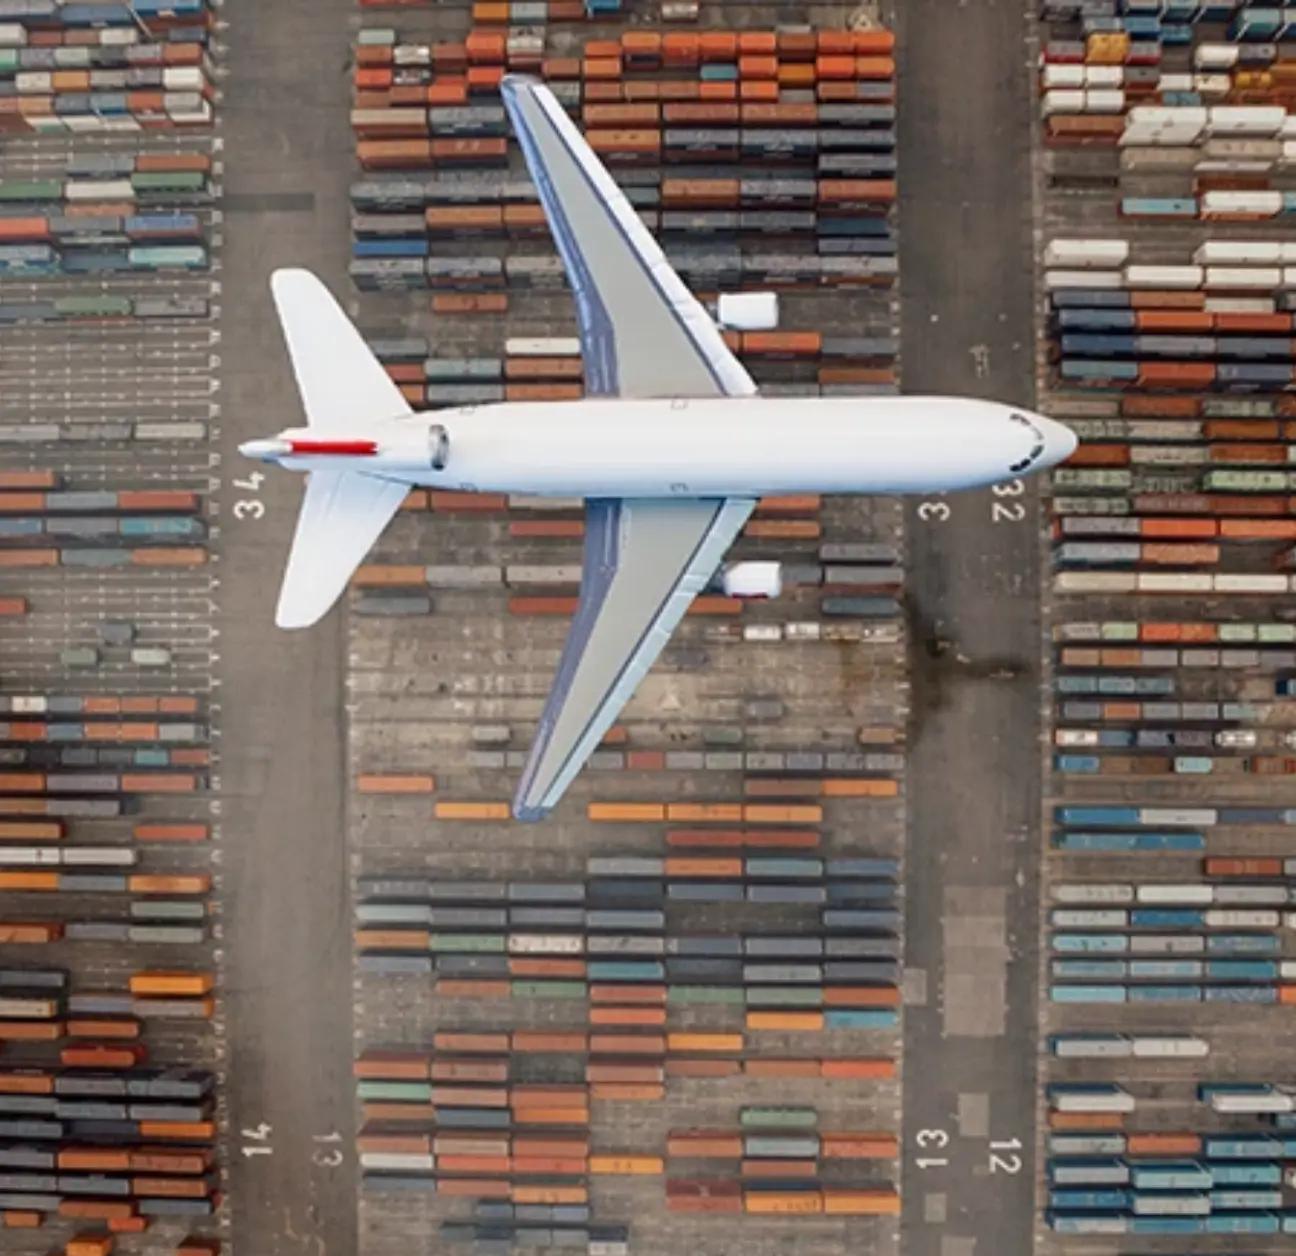 Air cargo and other shipments being managed through a CargoWise data integration.